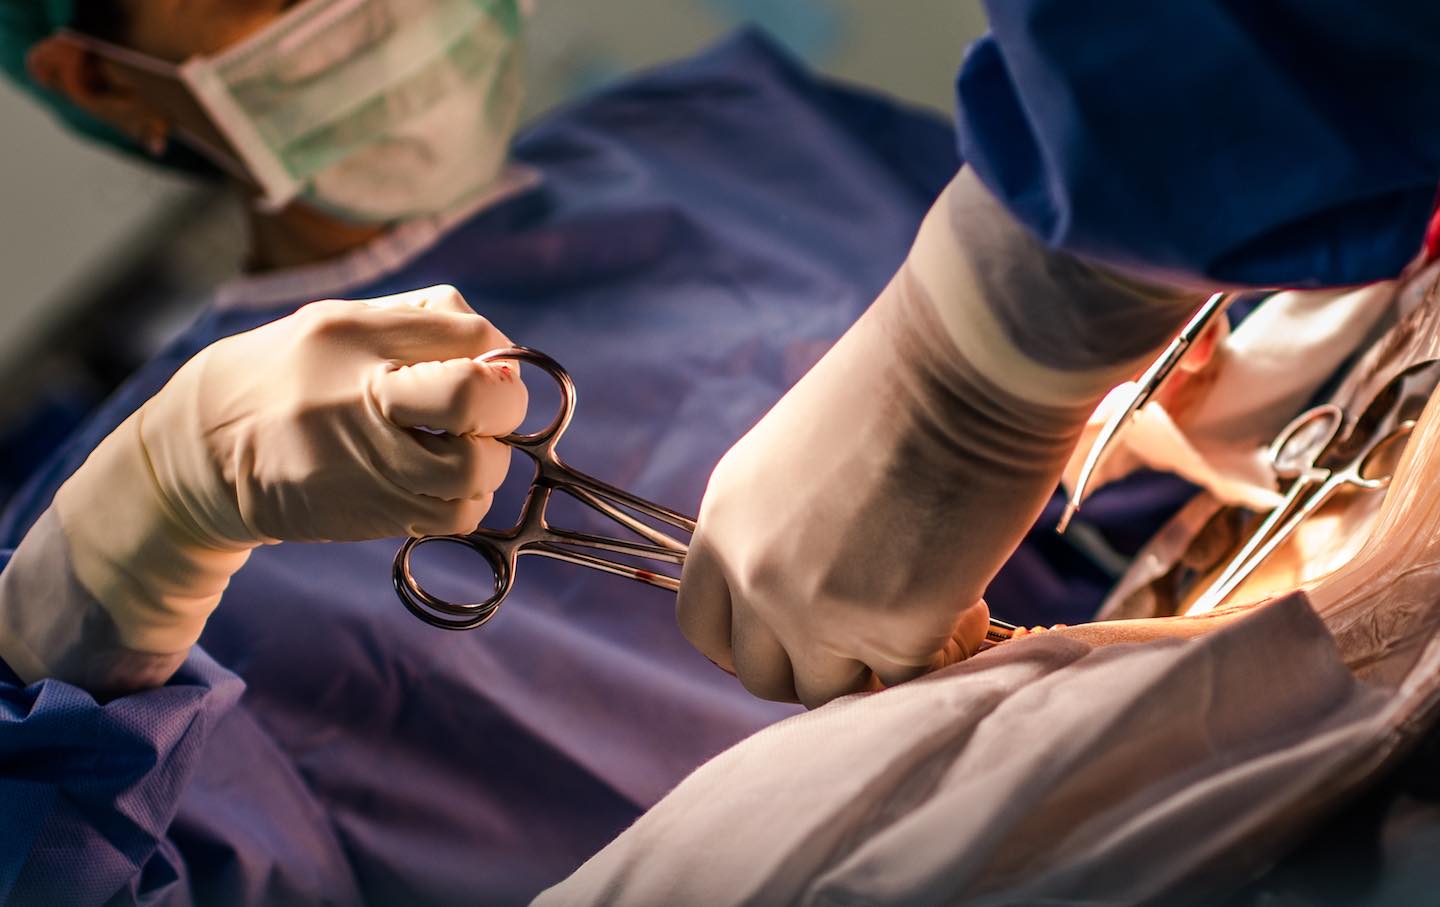 Fearing Legal Threats, Doctors Are Performing C-Sections in Lieu of Abortions